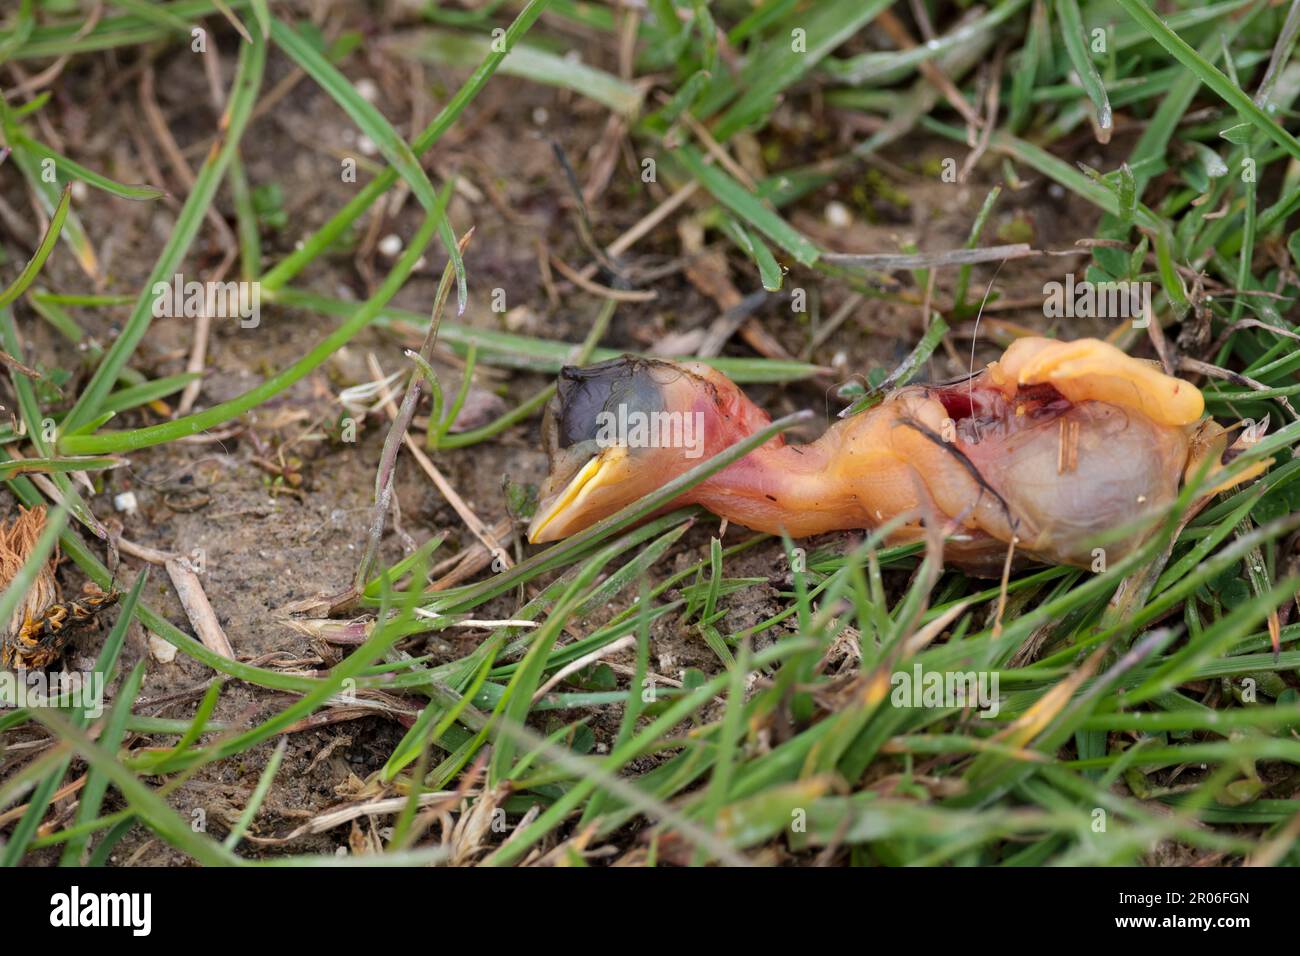 Dead chick unfeathered pink body yellow bill grey around closed eyes laying in grass, late spring breeding season uk no nest around dropped by bird? Stock Photo